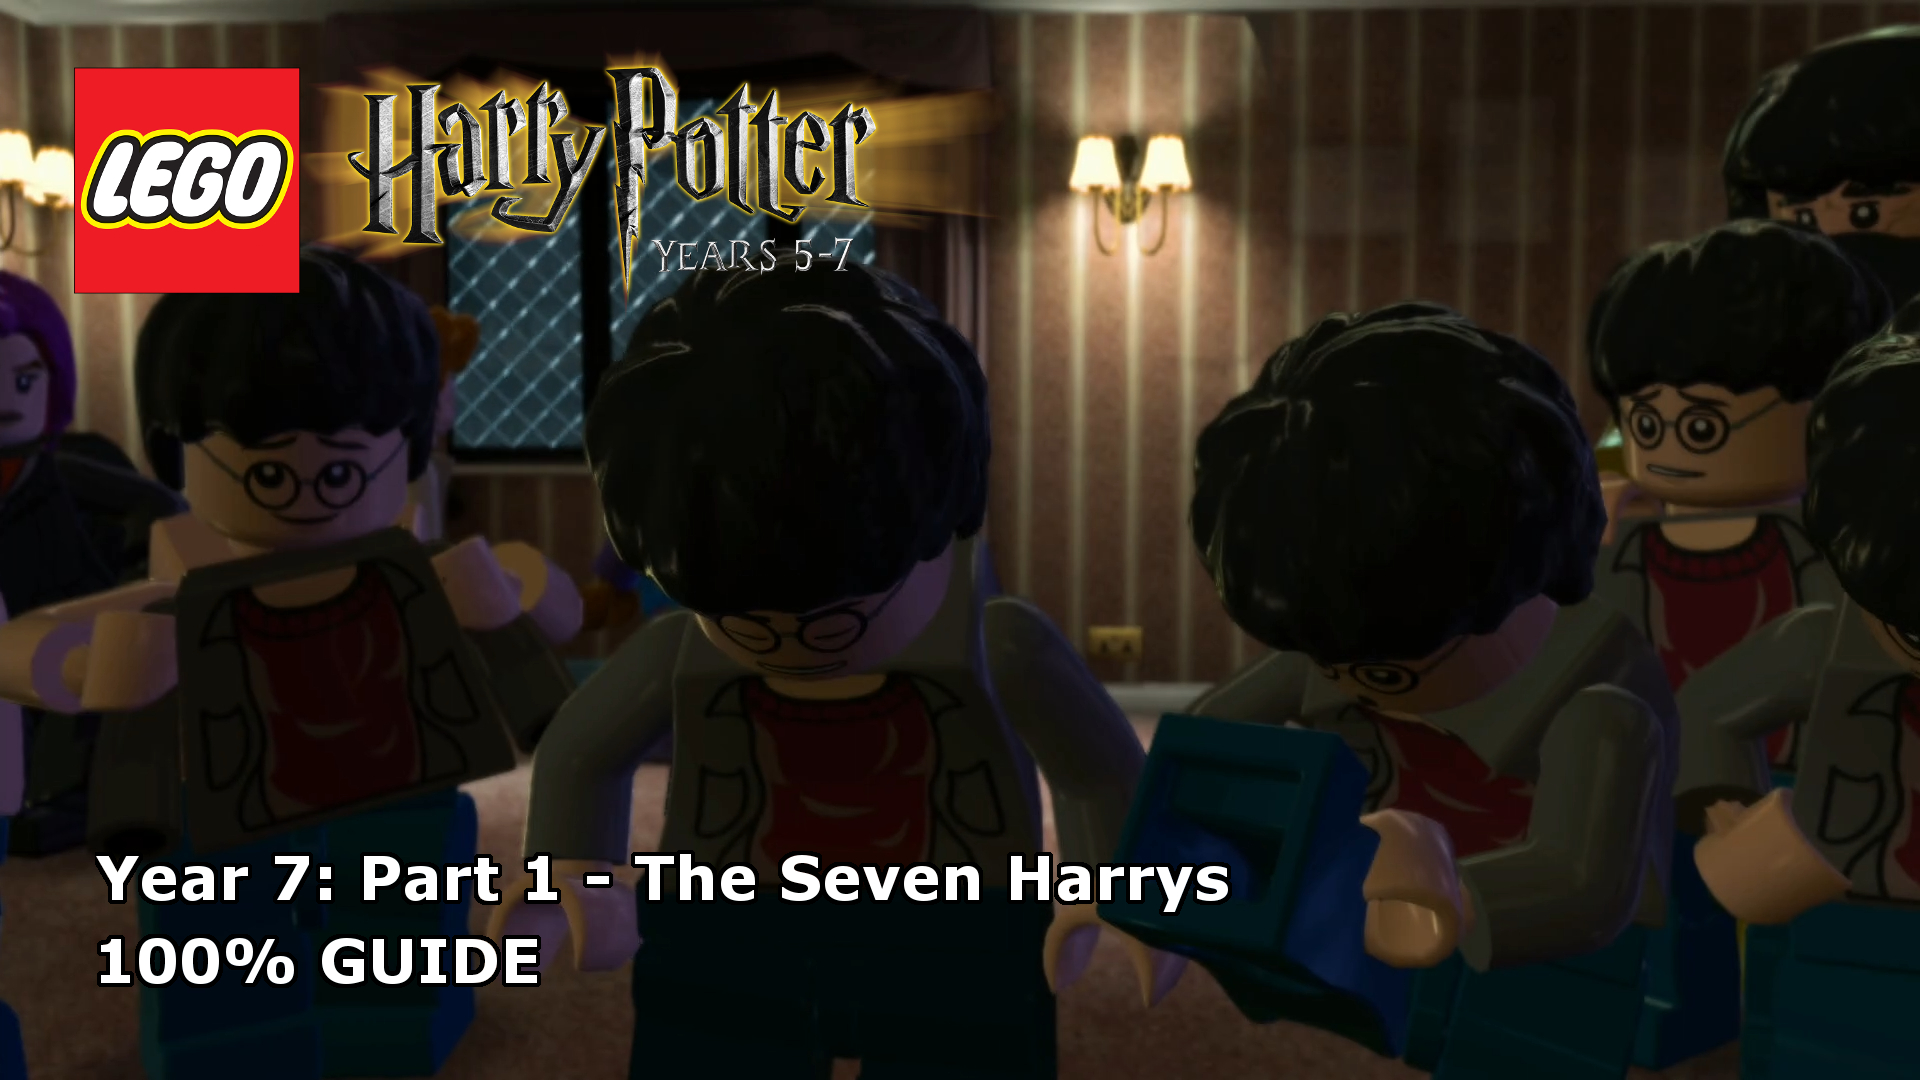 Lego Harry Potter: Years 5-7 – Dark Times 100% Guide